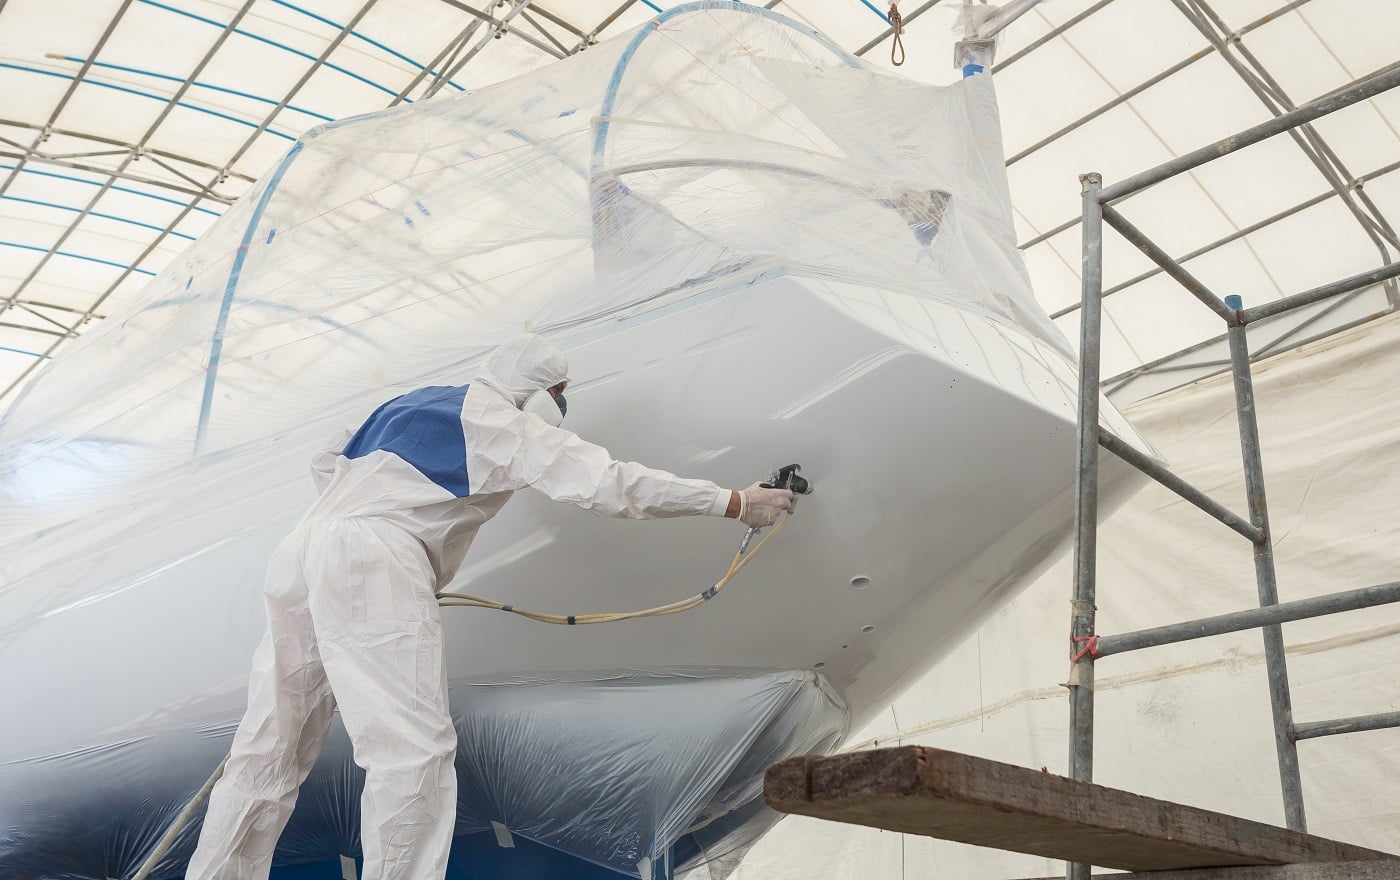 Worker wearing protective uniform and spraying paint to the boat